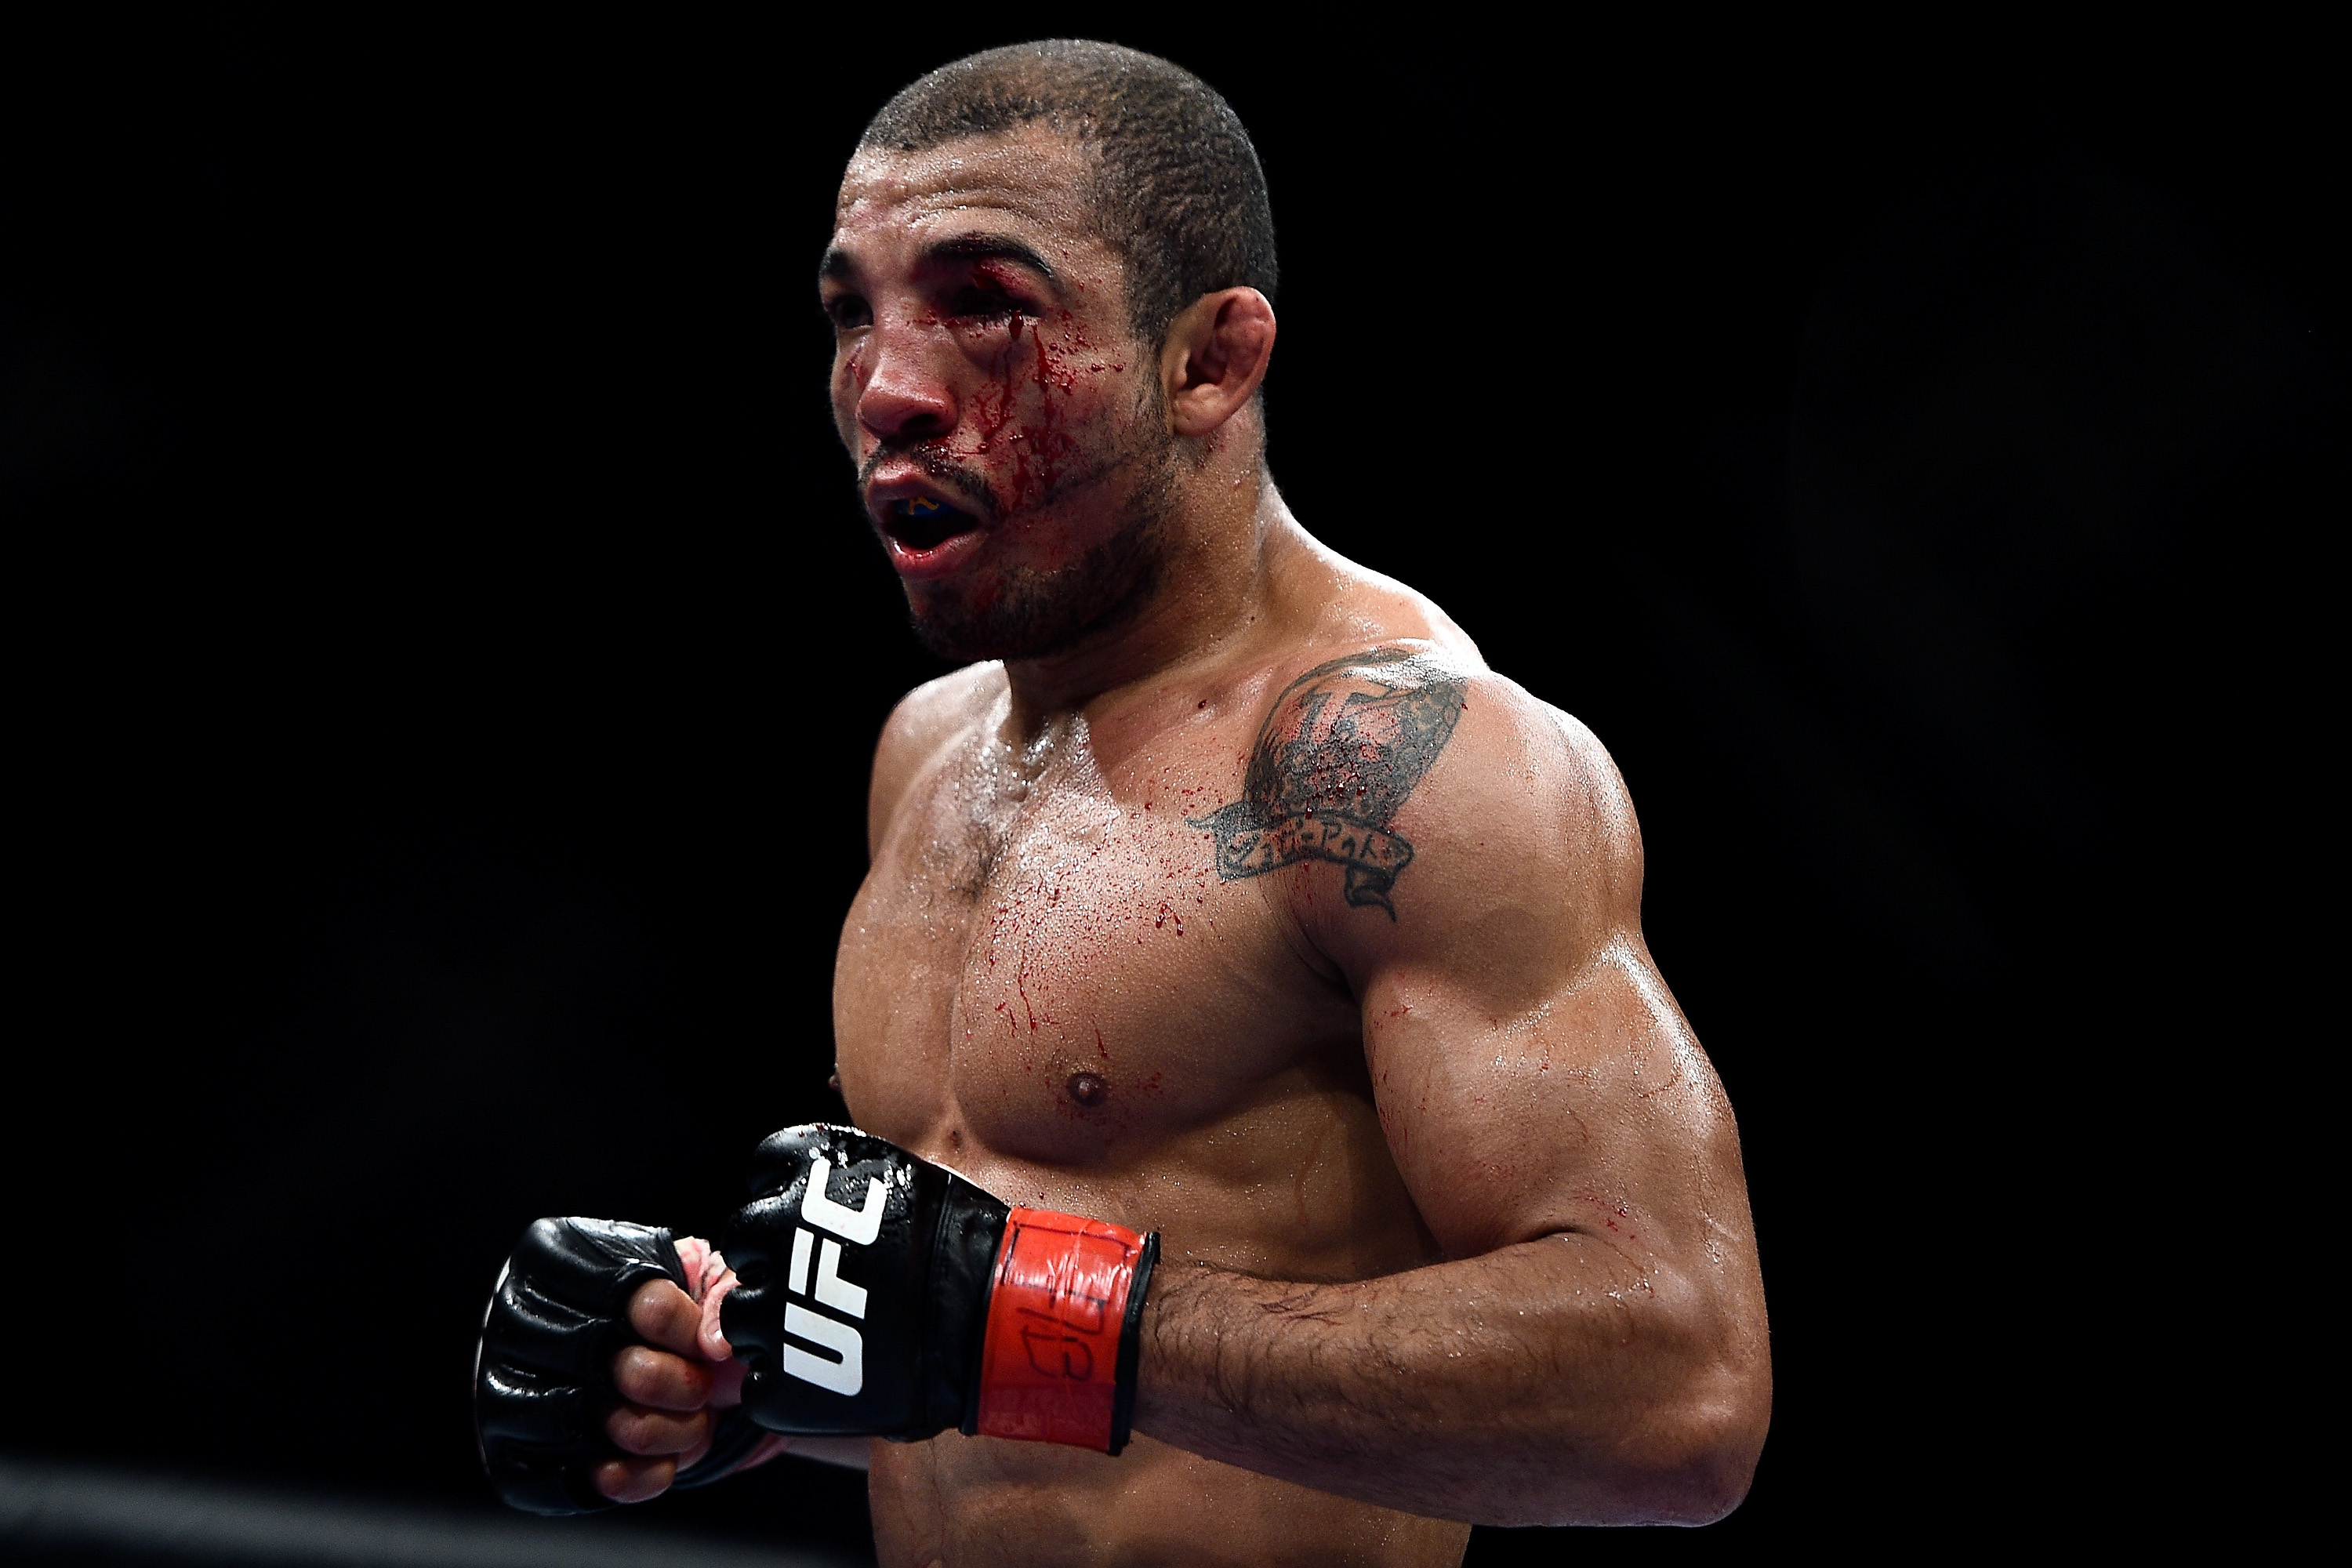 Jose Aldo Publishes of Broken Takes Shot at Conor McGregor | Bleacher Report | Latest News, Videos Highlights